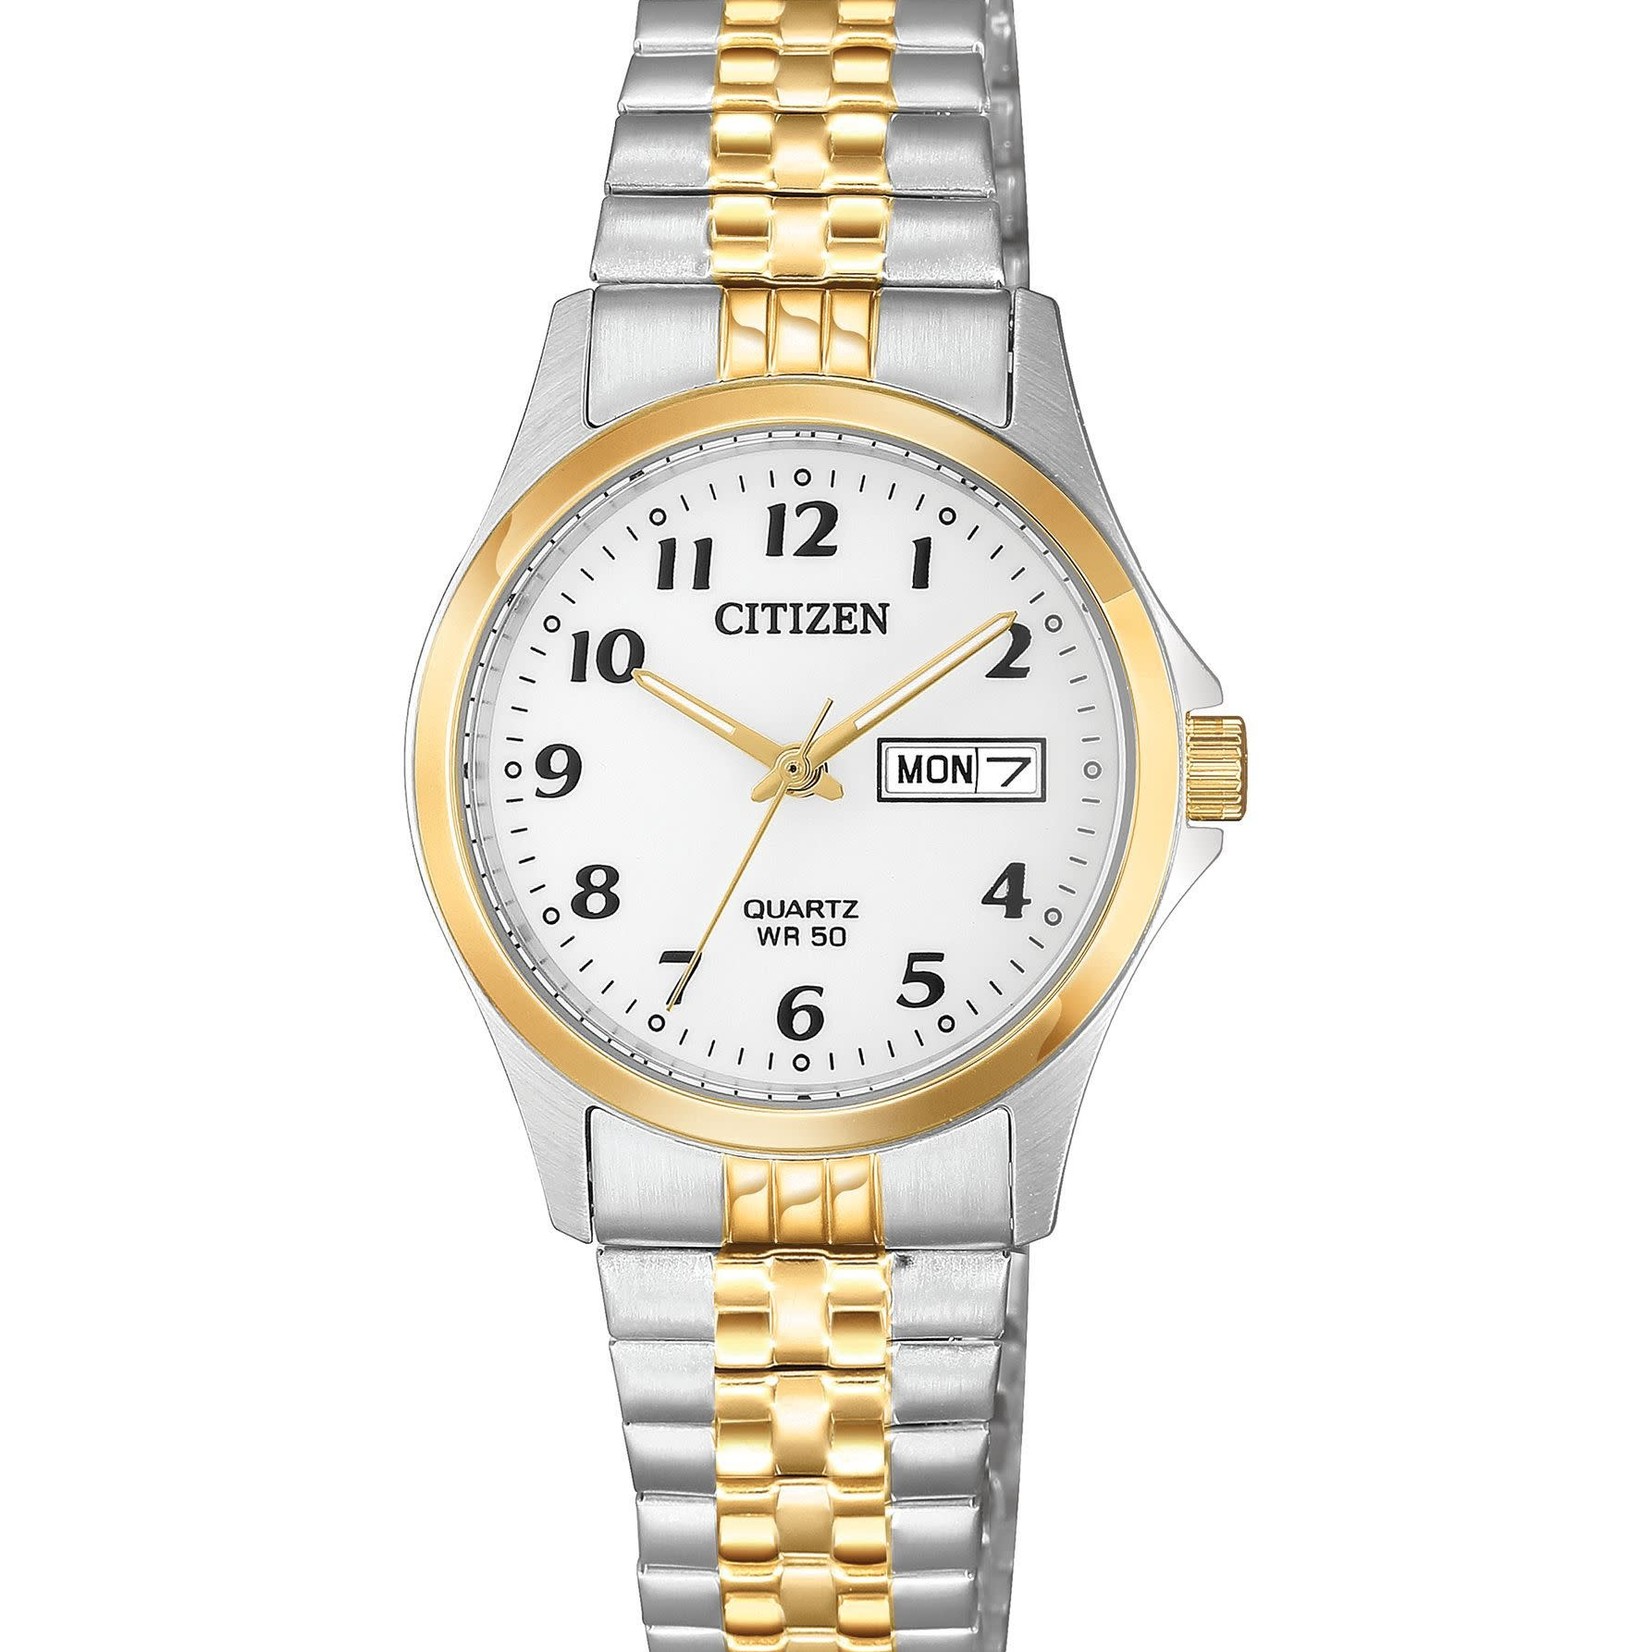 CITIZEN WATCH COMPANY Citizen Quartz SS Two Tone White Dial Expansion Band Watch w/Date/Date